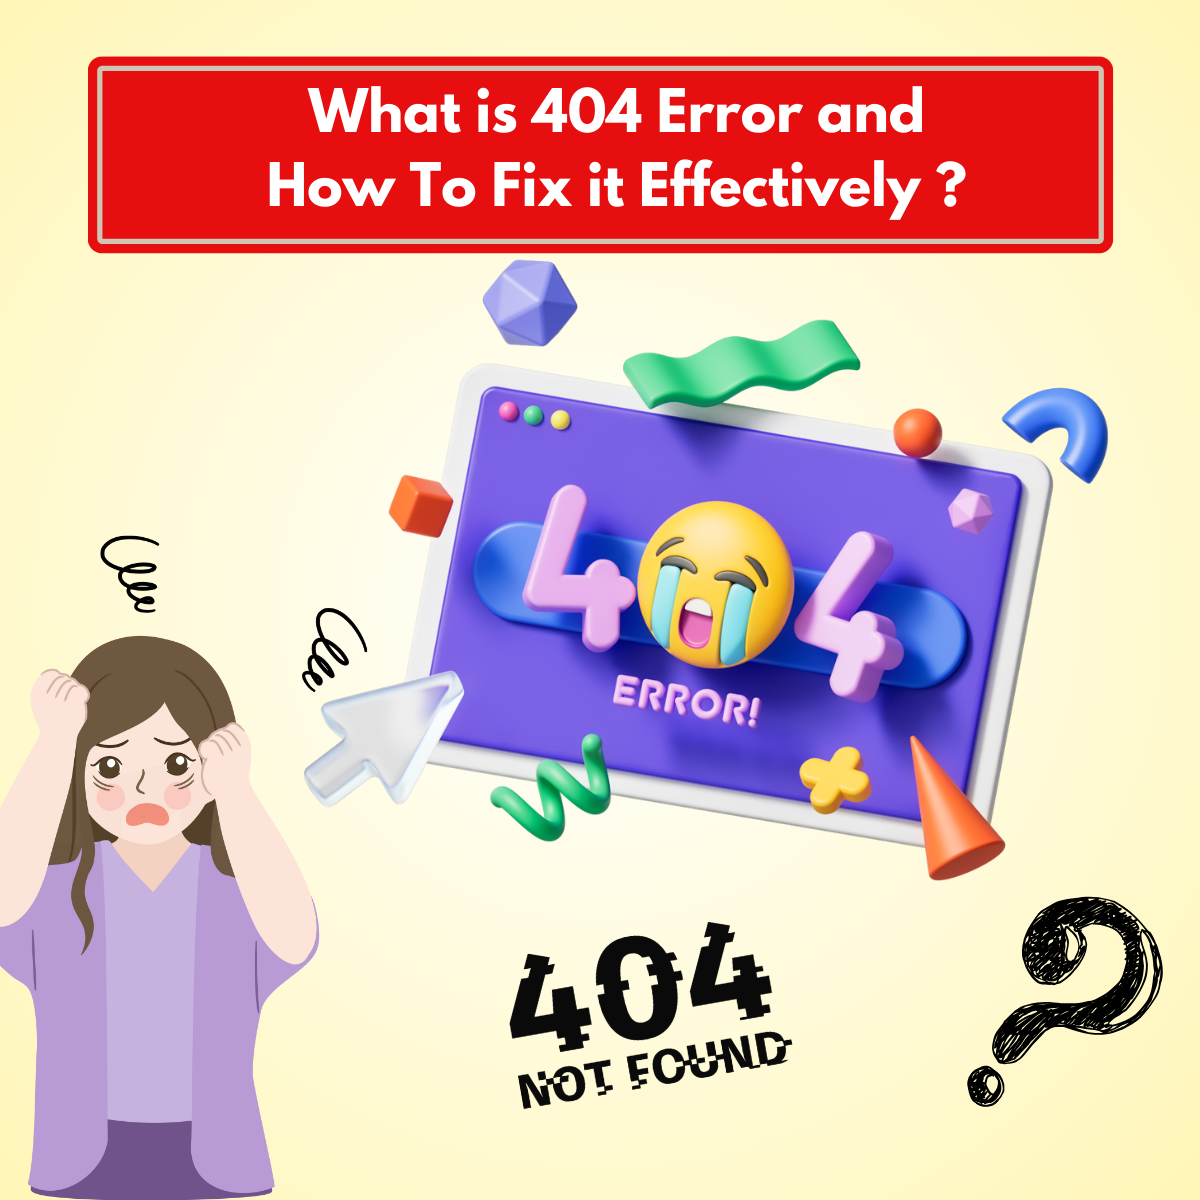 What is 404 Error and How To Fix it Effectively ?